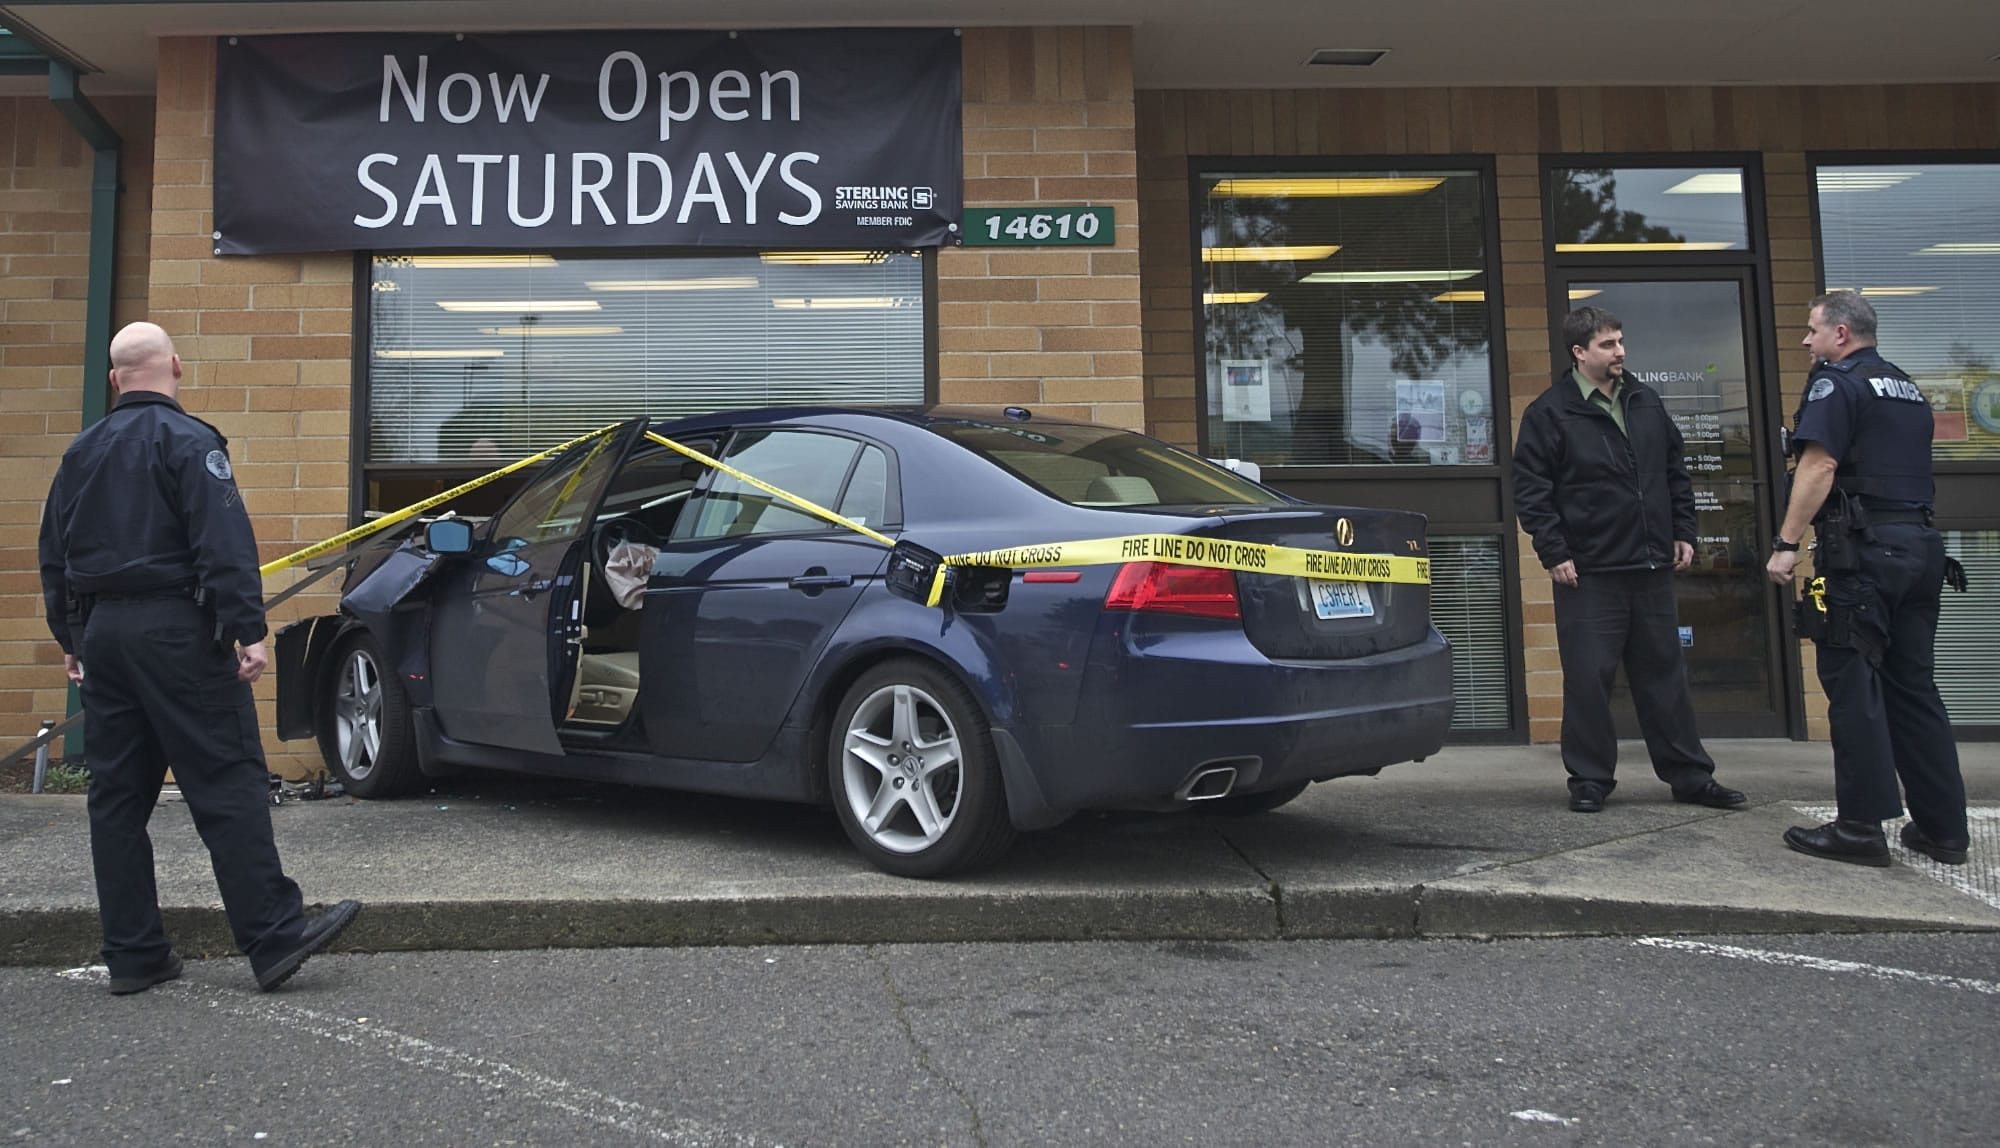 Police speak to the manager of Sterling Savings after a woman accidently drove her car through the window Wednesday afternoon.